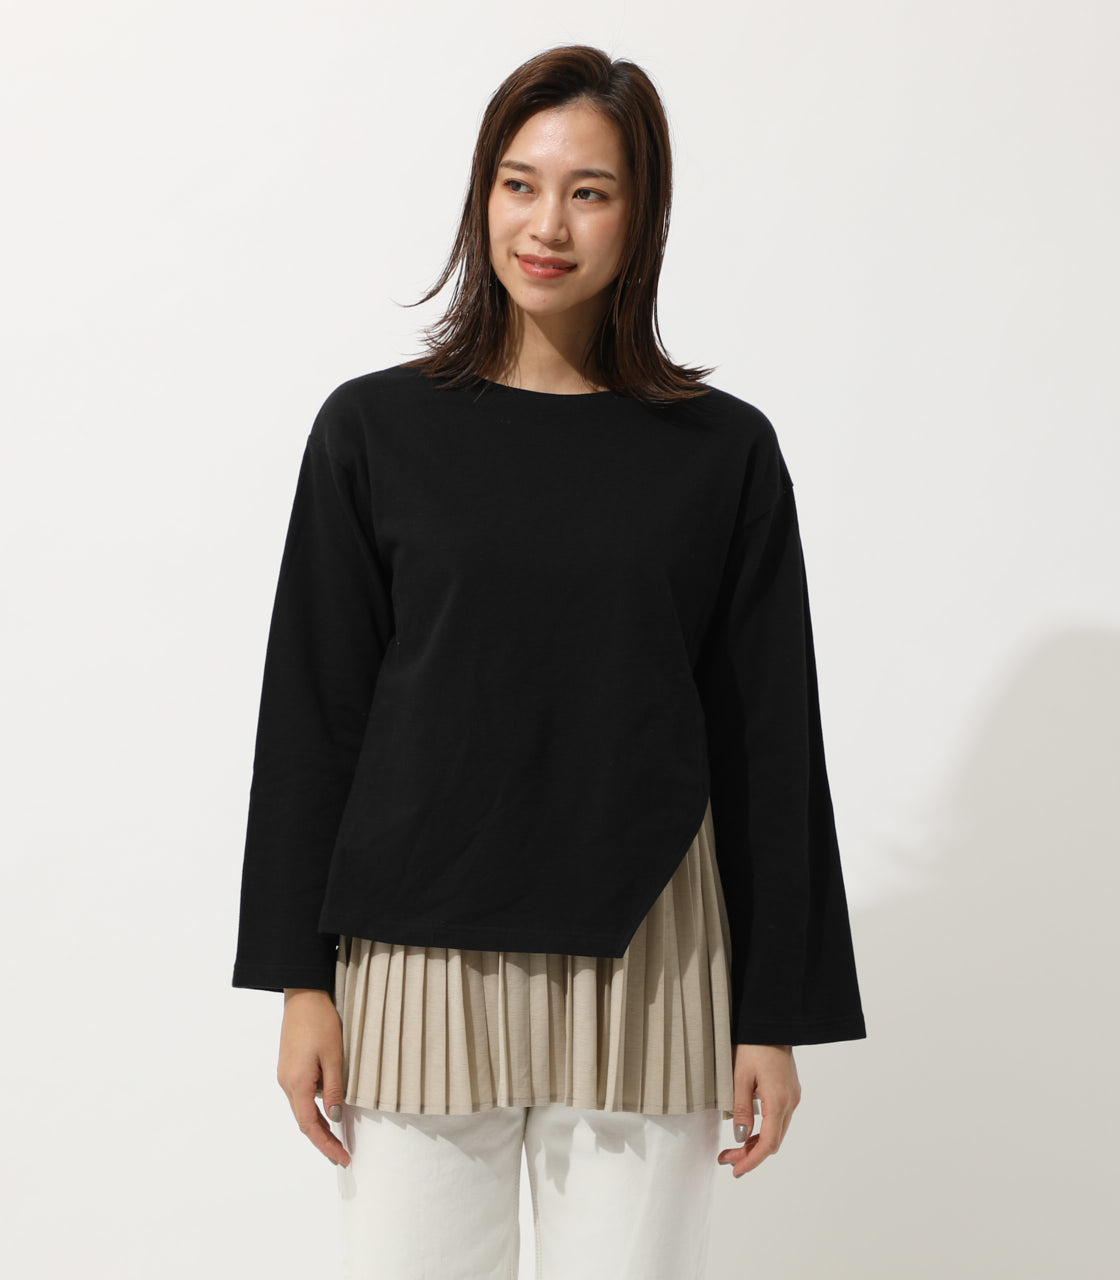 LAYER PLEATS COMBI TOP/レイヤードプリーツコンビトップ 詳細画像 柄BLK 4